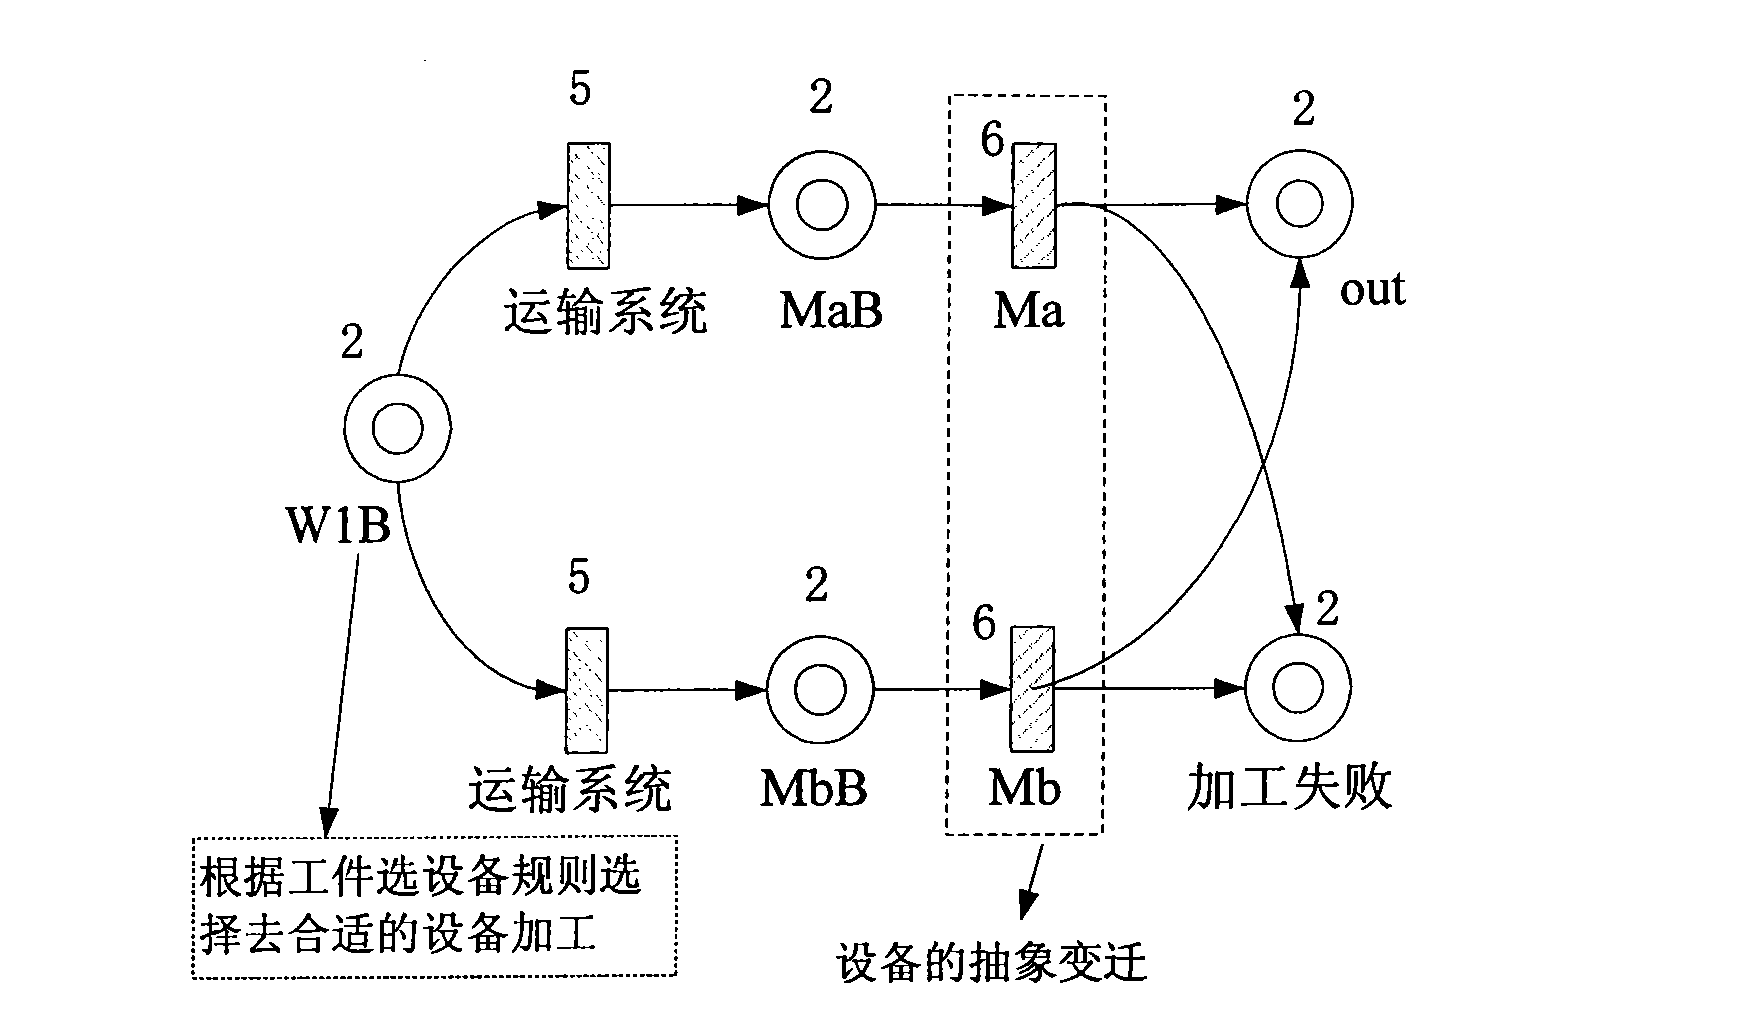 Semiconductor production line model building, optimizing and scheduling method based on petri net and immune arithmetic